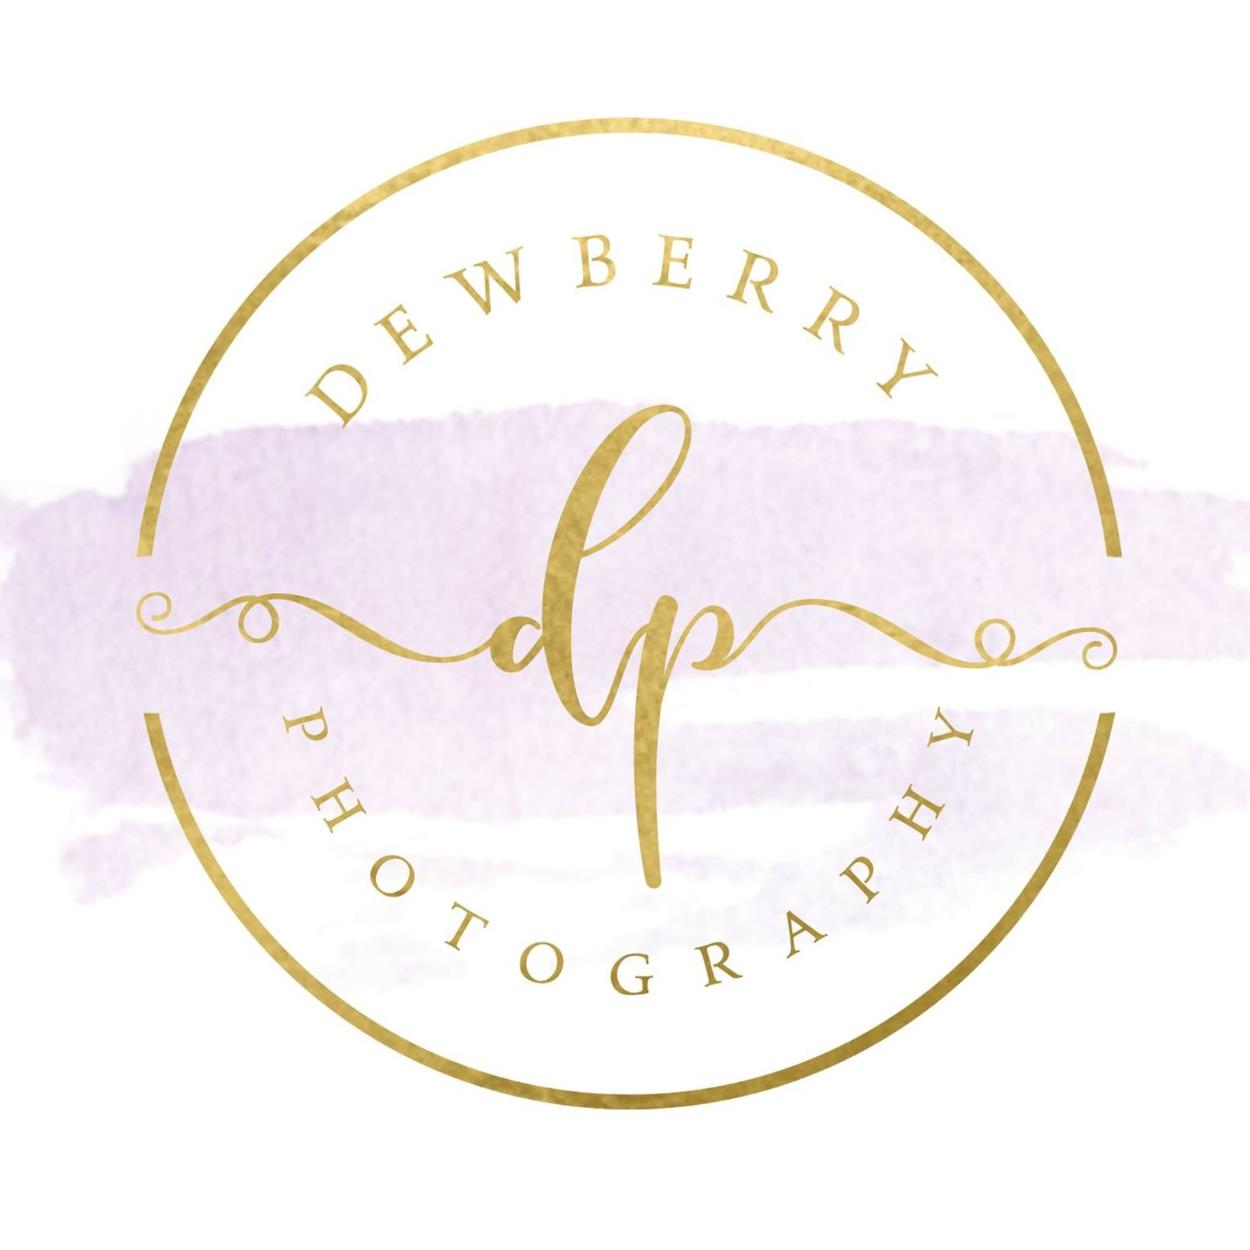 Dewberry Photography and Design